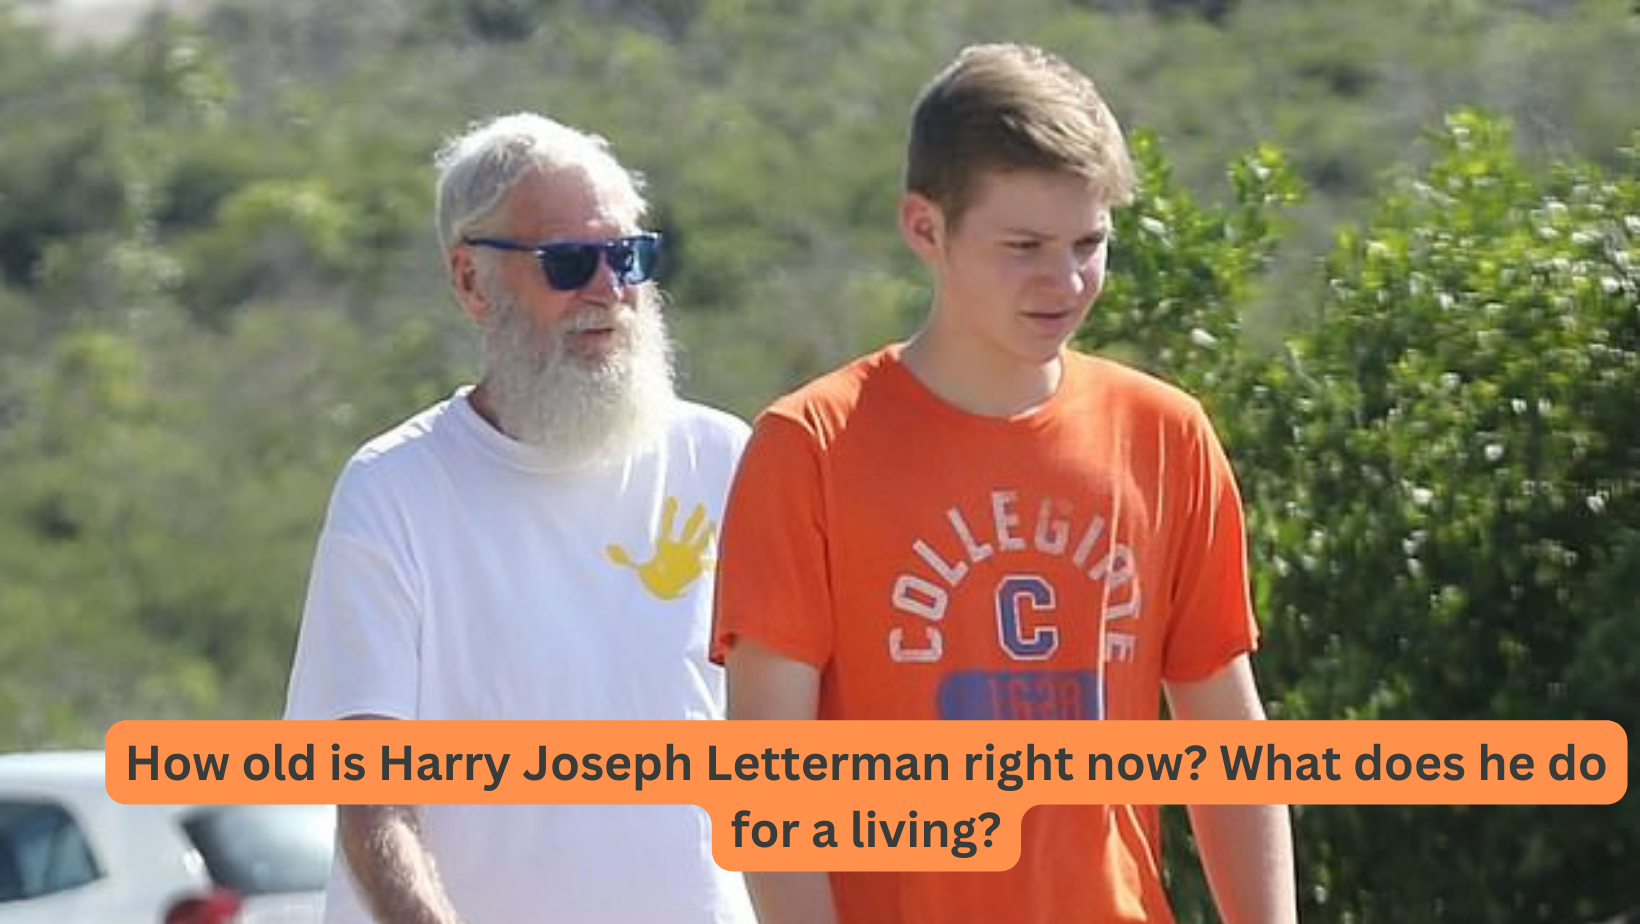 All the details about Harry Joseph Letterman